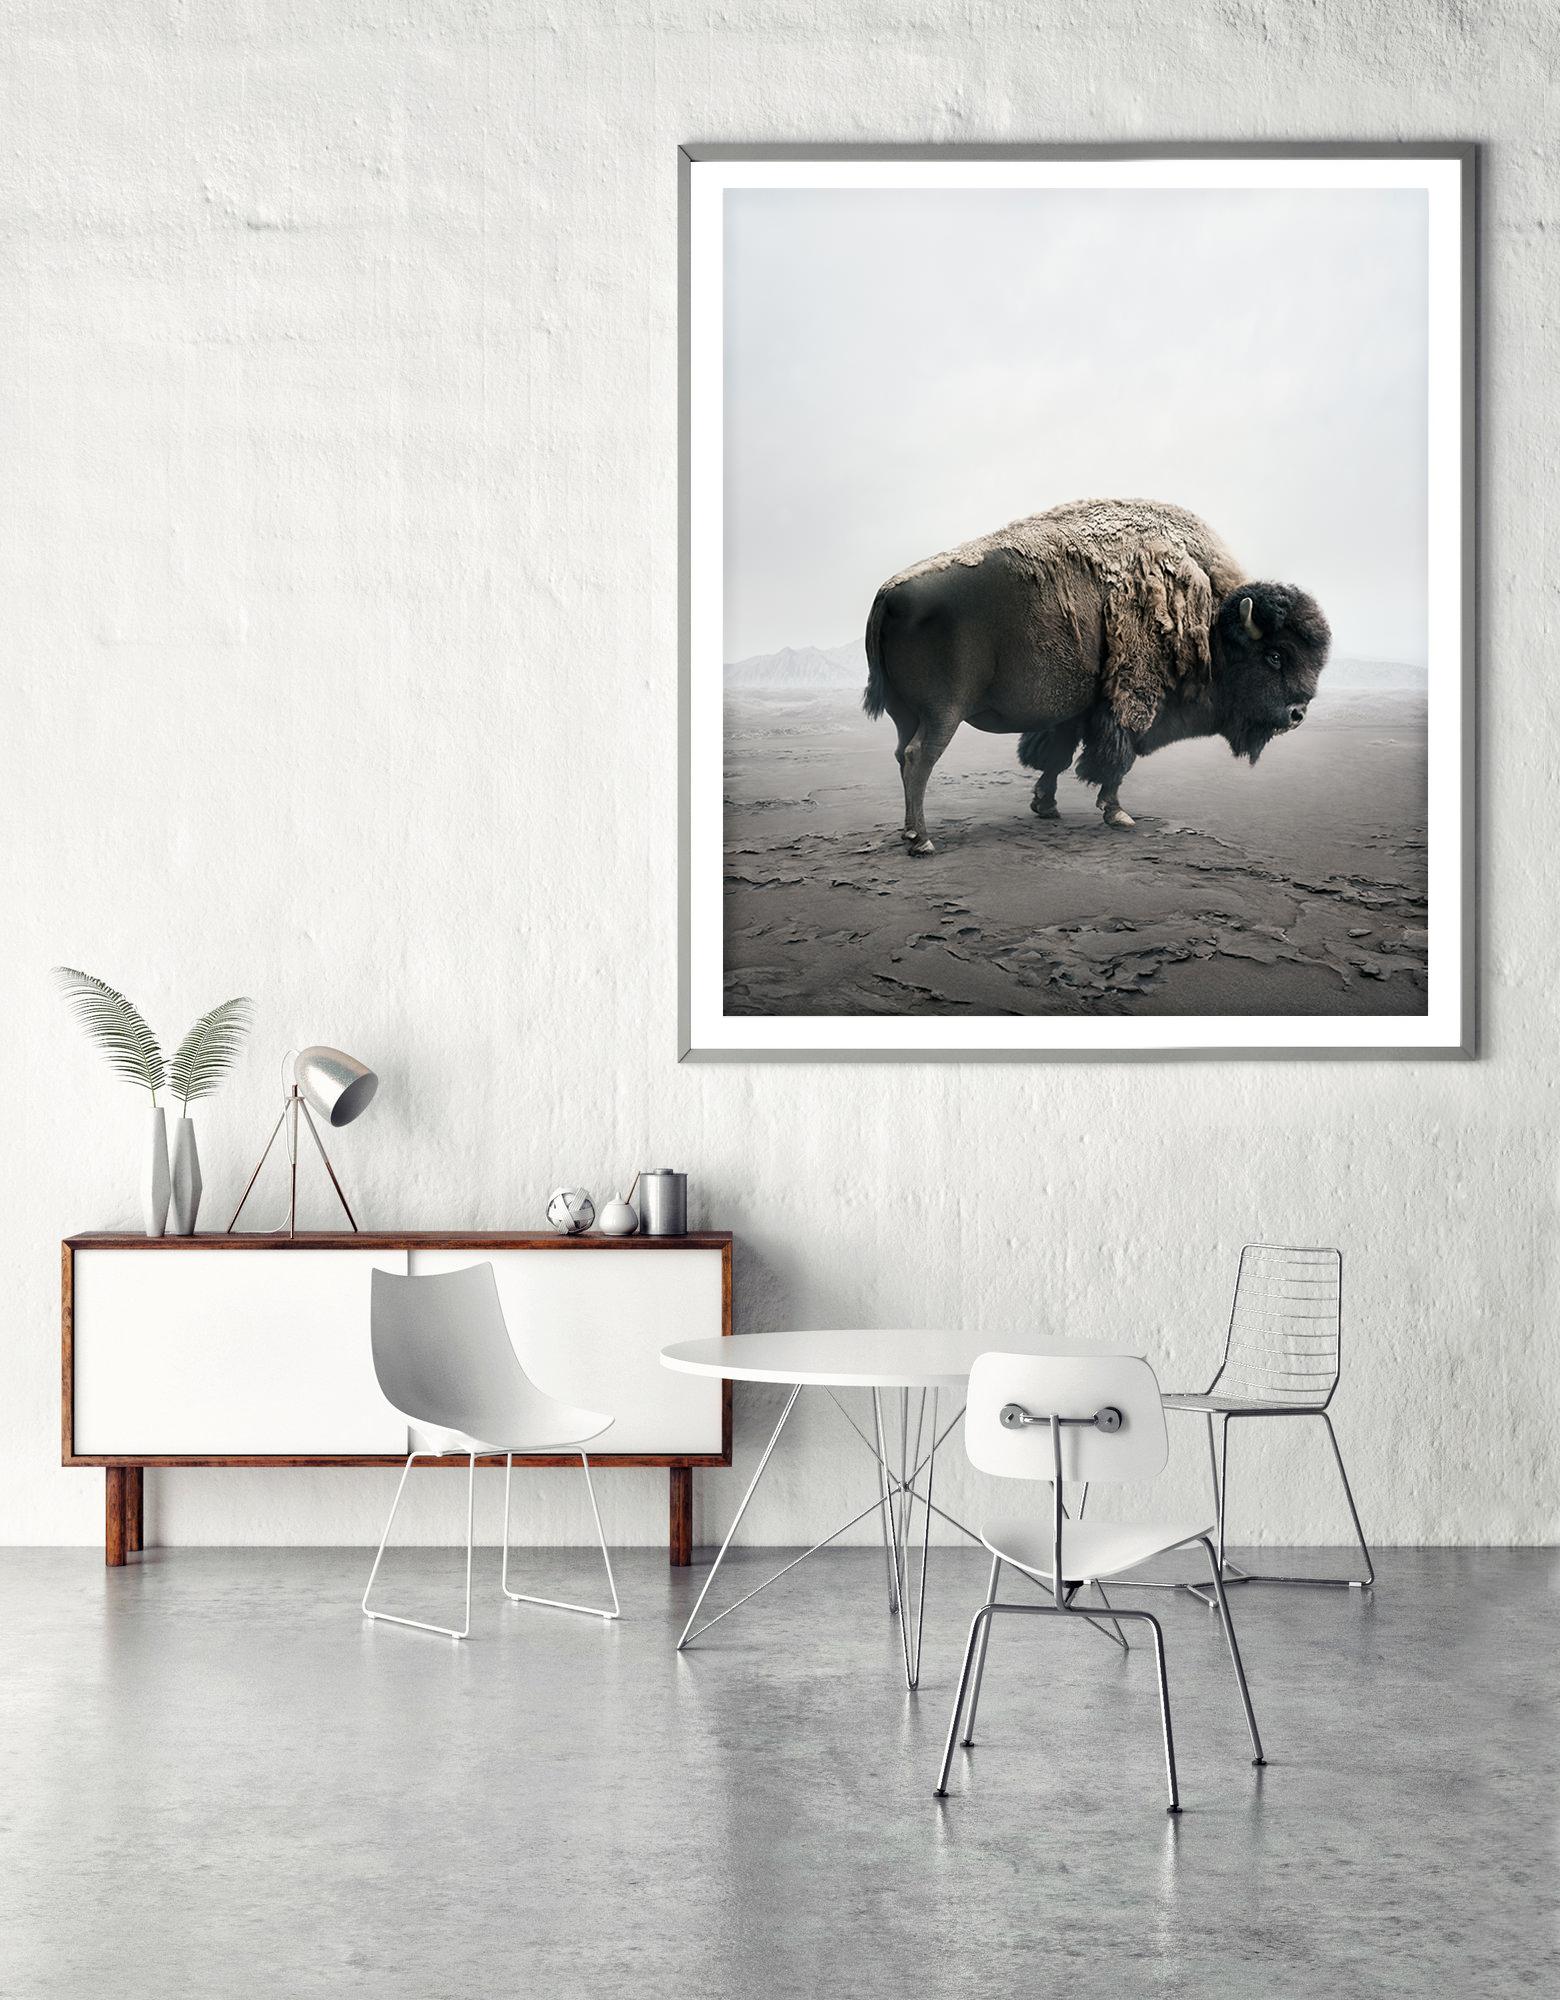 Be Here Bison - Gray Color Photograph by Alice Zilberberg